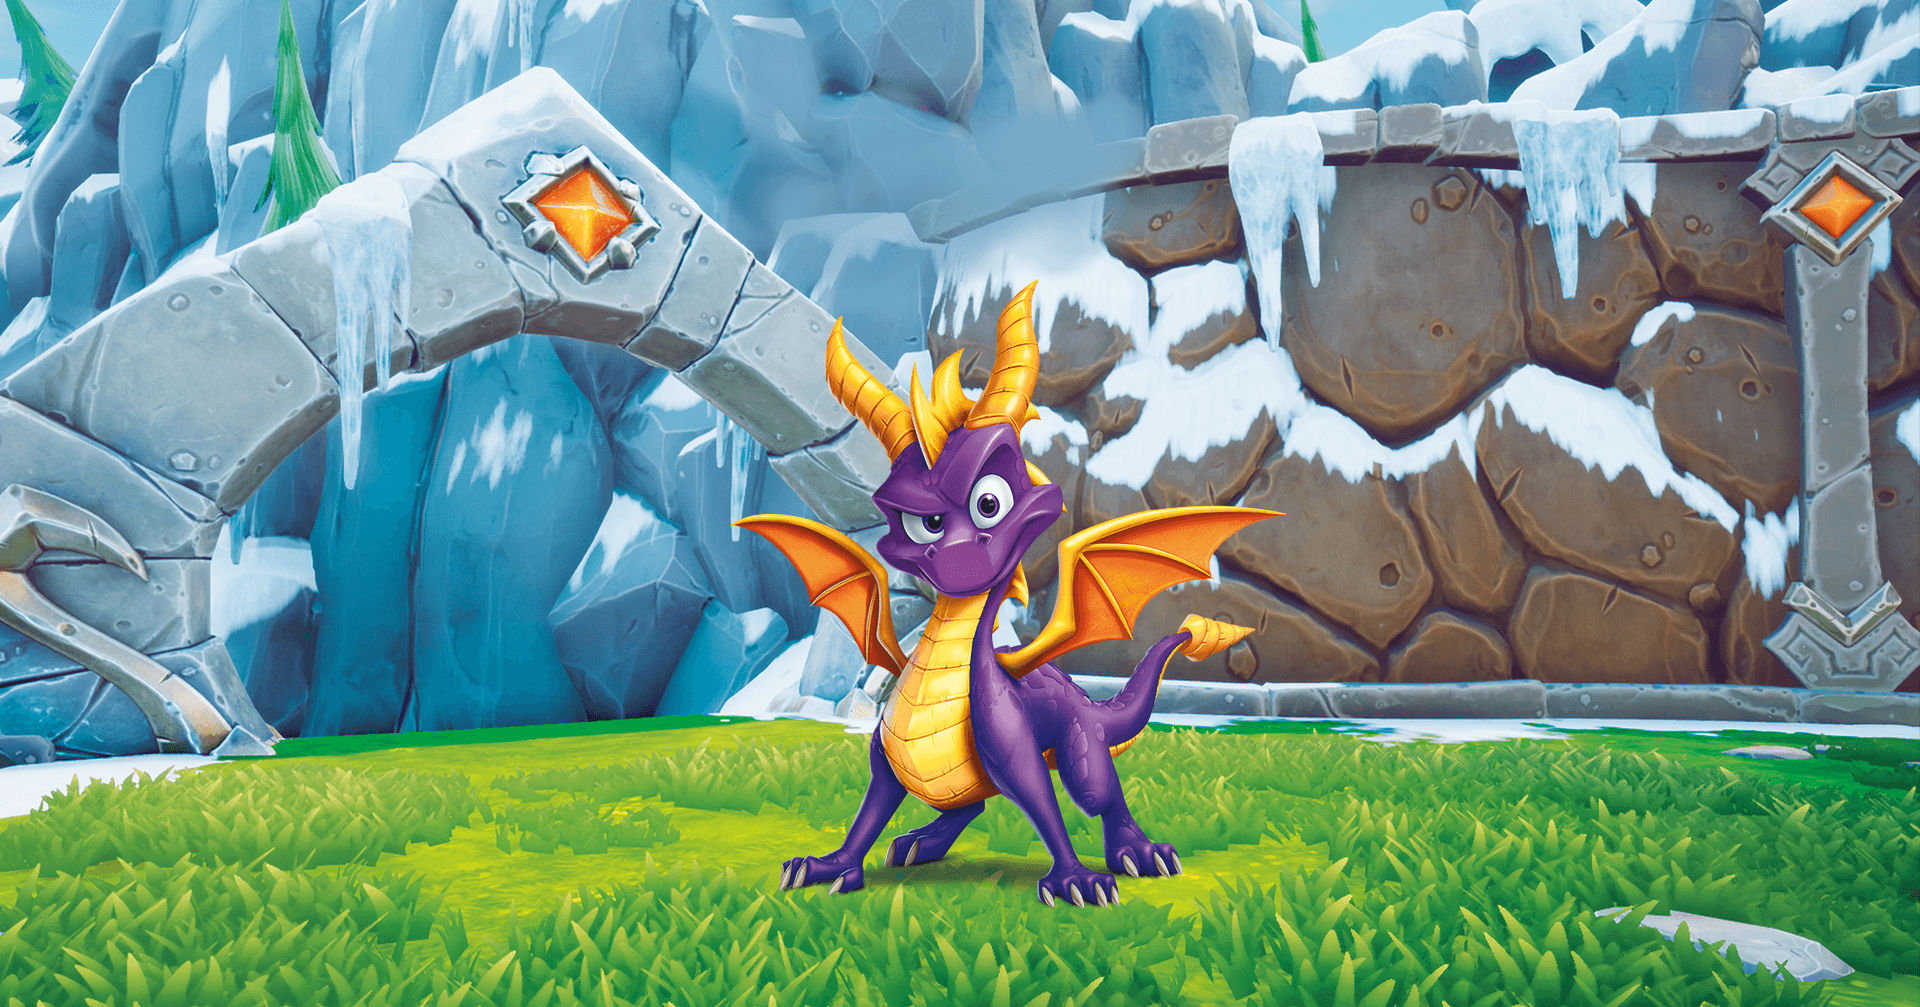 spyro game where he collects dragon eggs